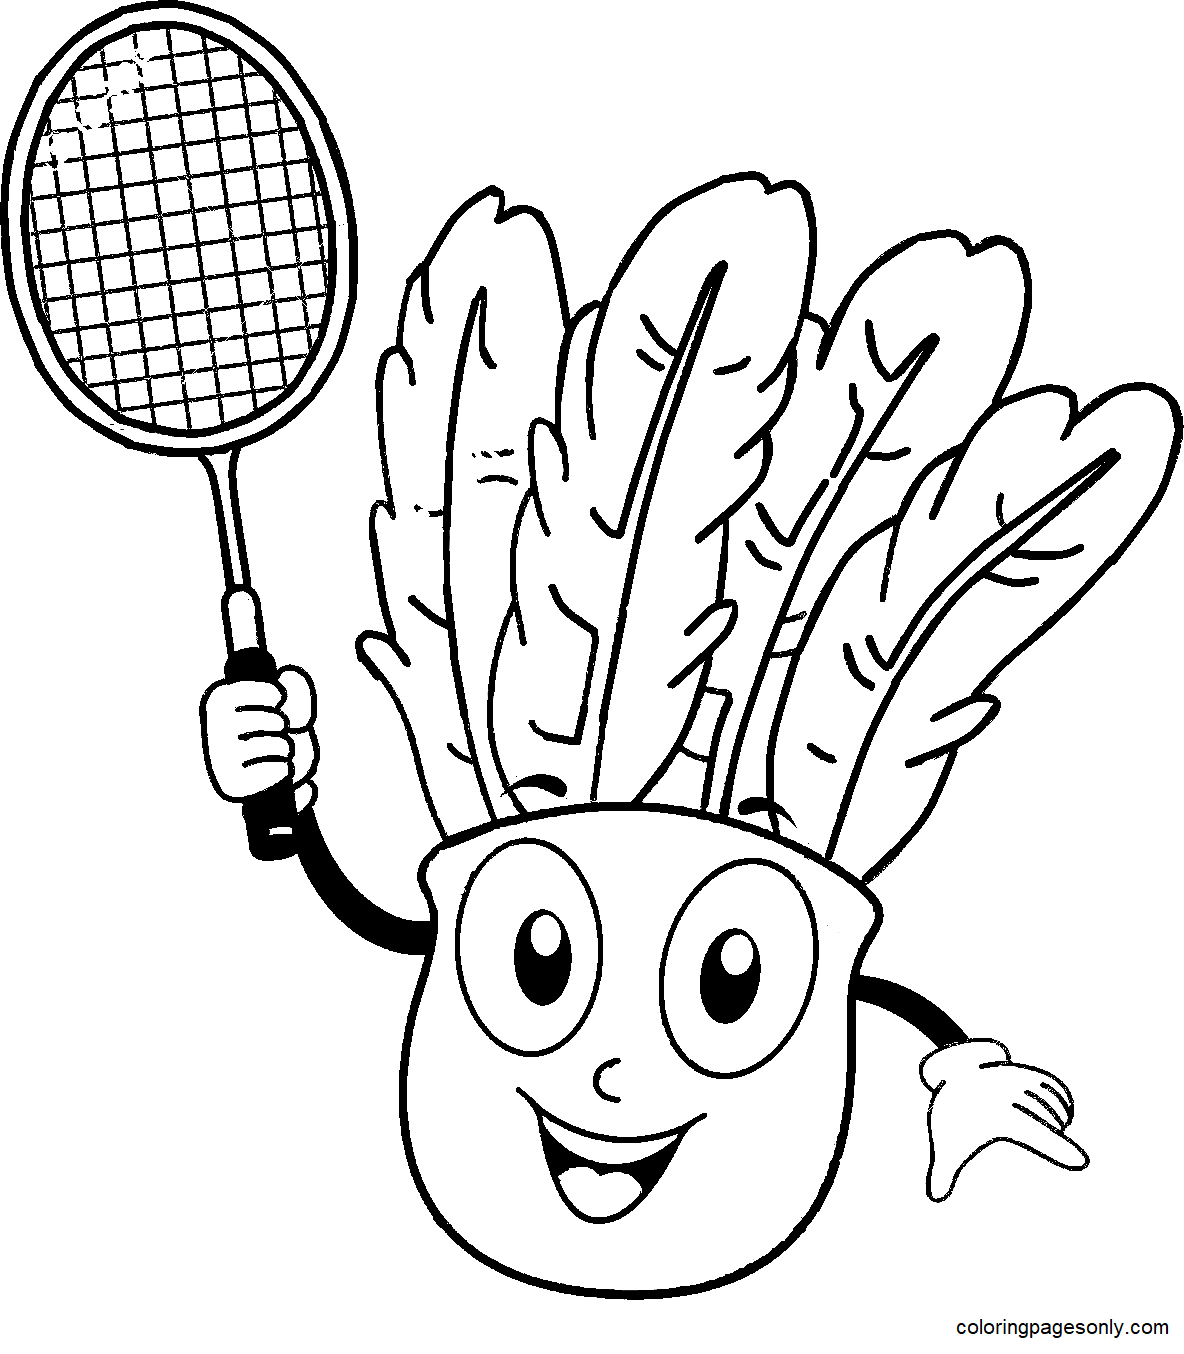 Shuttlecock Mascot holding a Badminton Racket Coloring Page